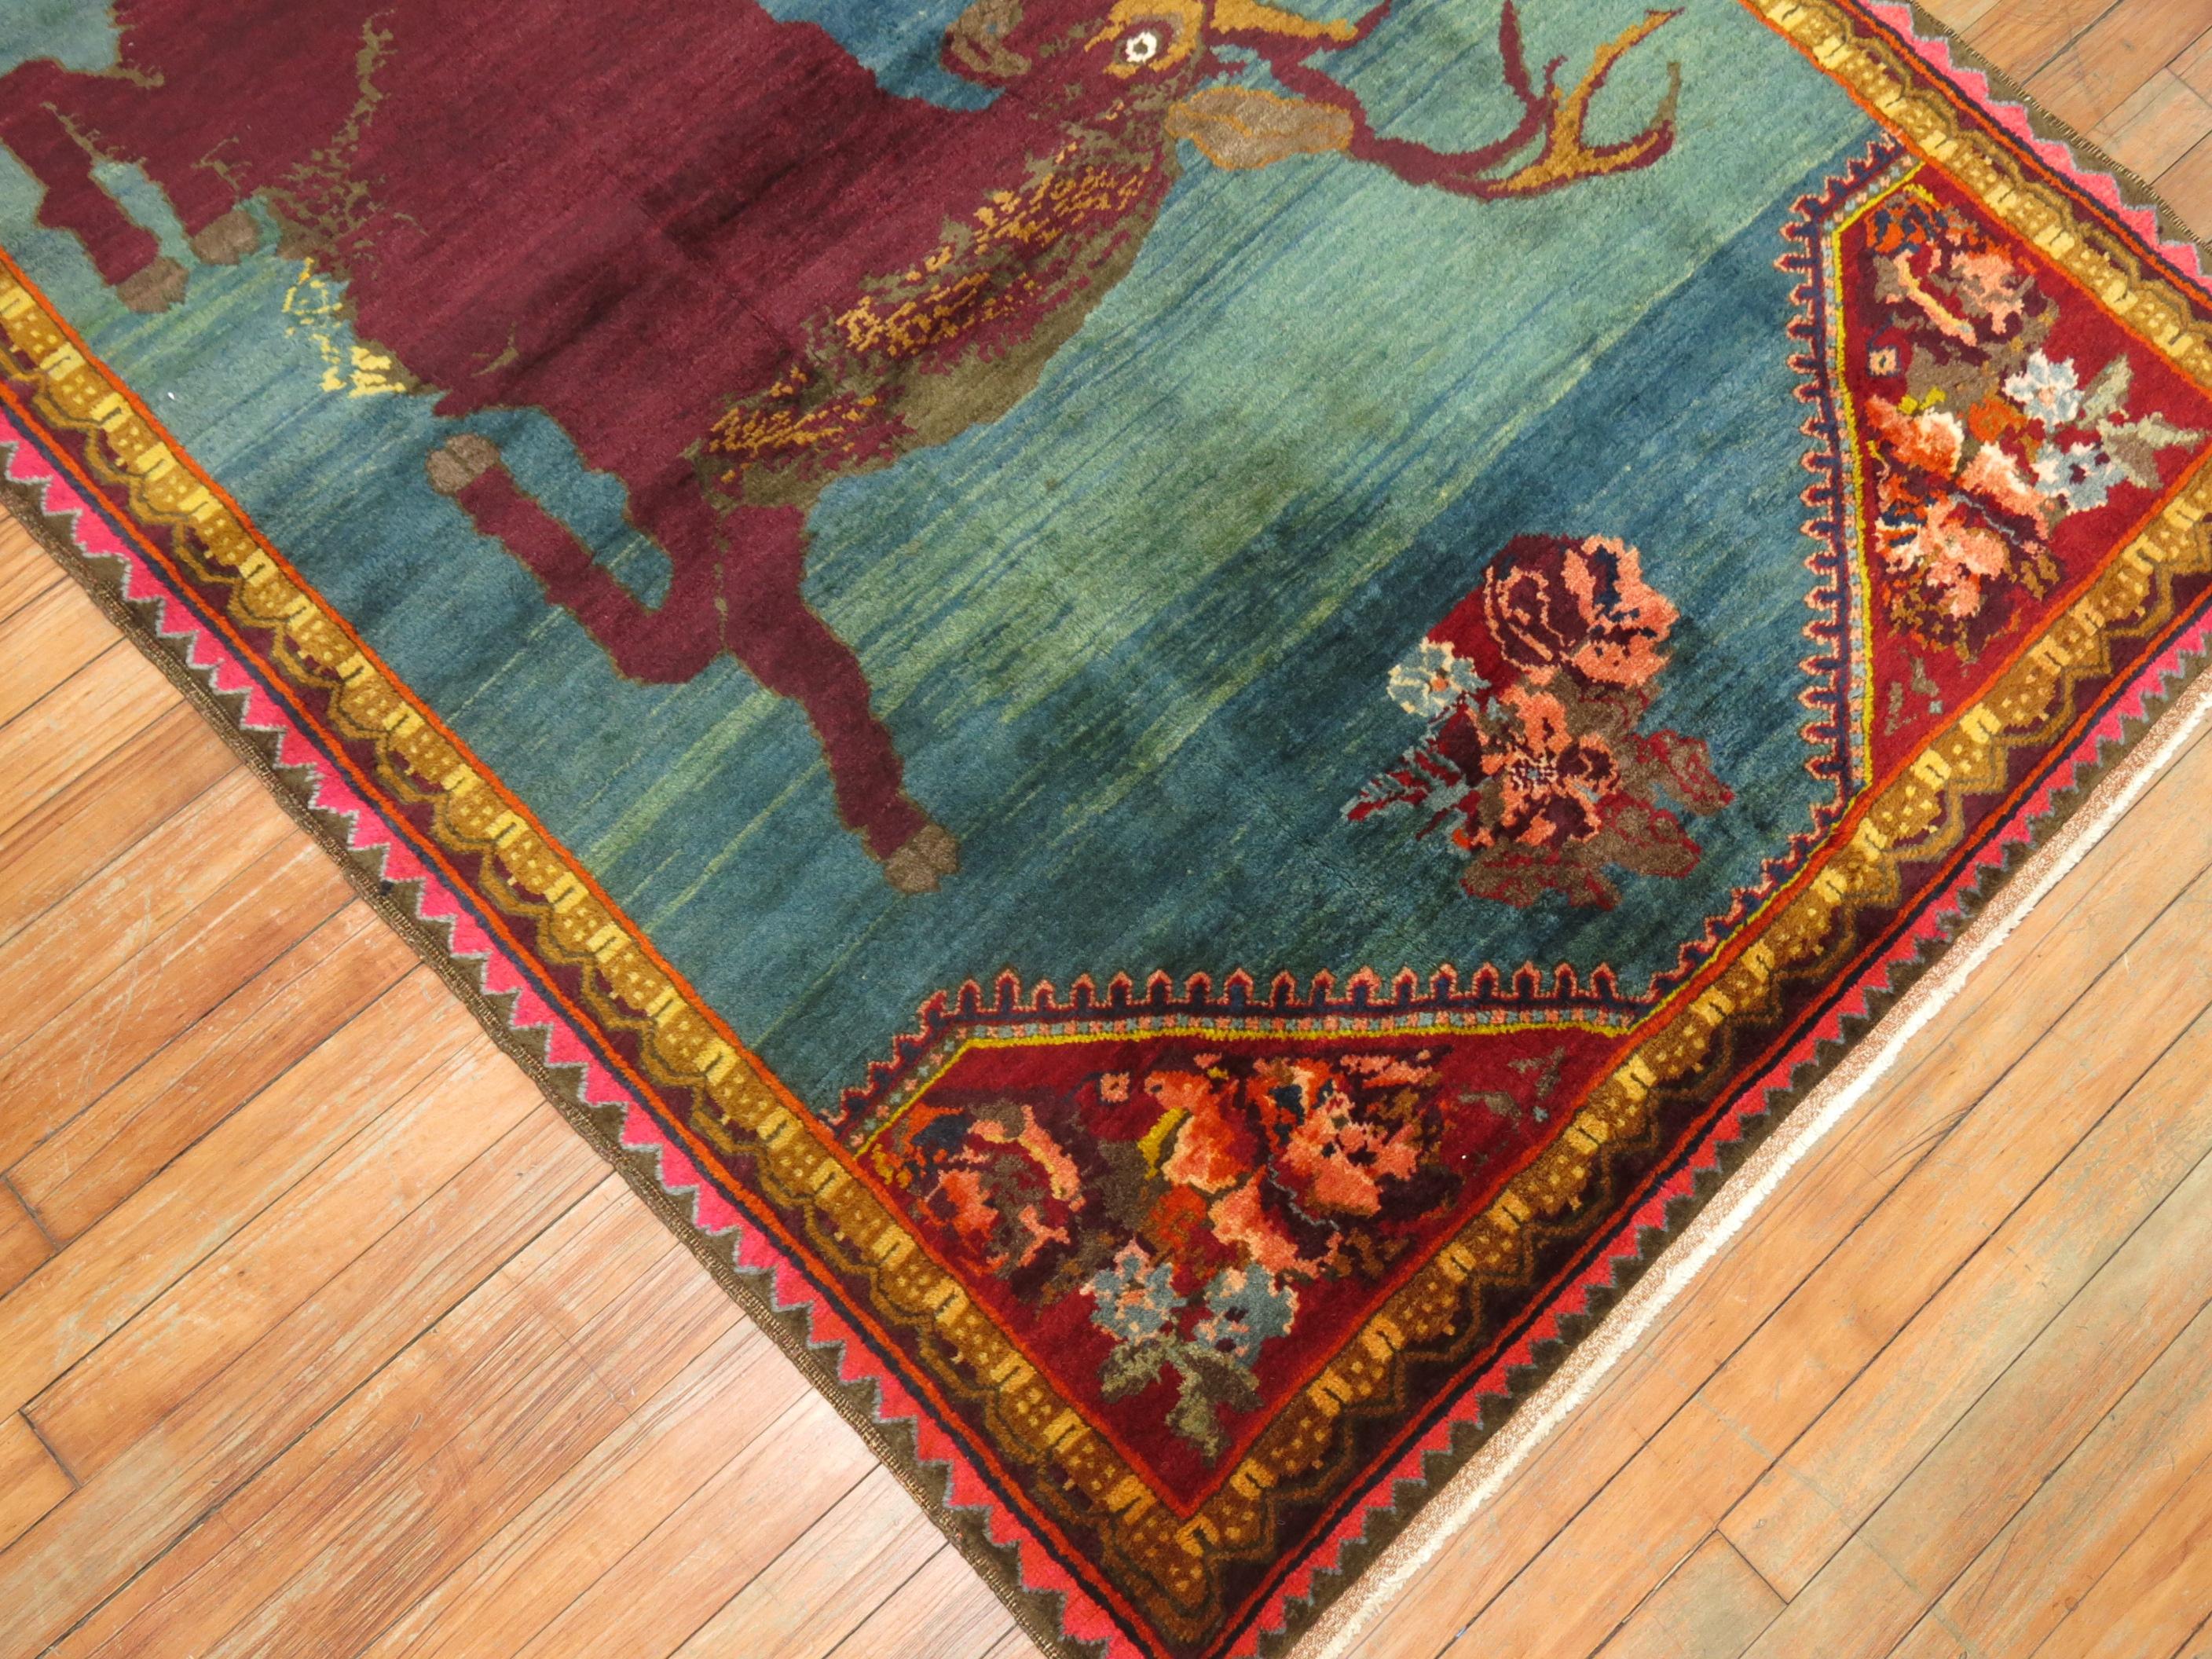 Marvelous Pictorial Russian Karabagh rug with a large sitting deer.